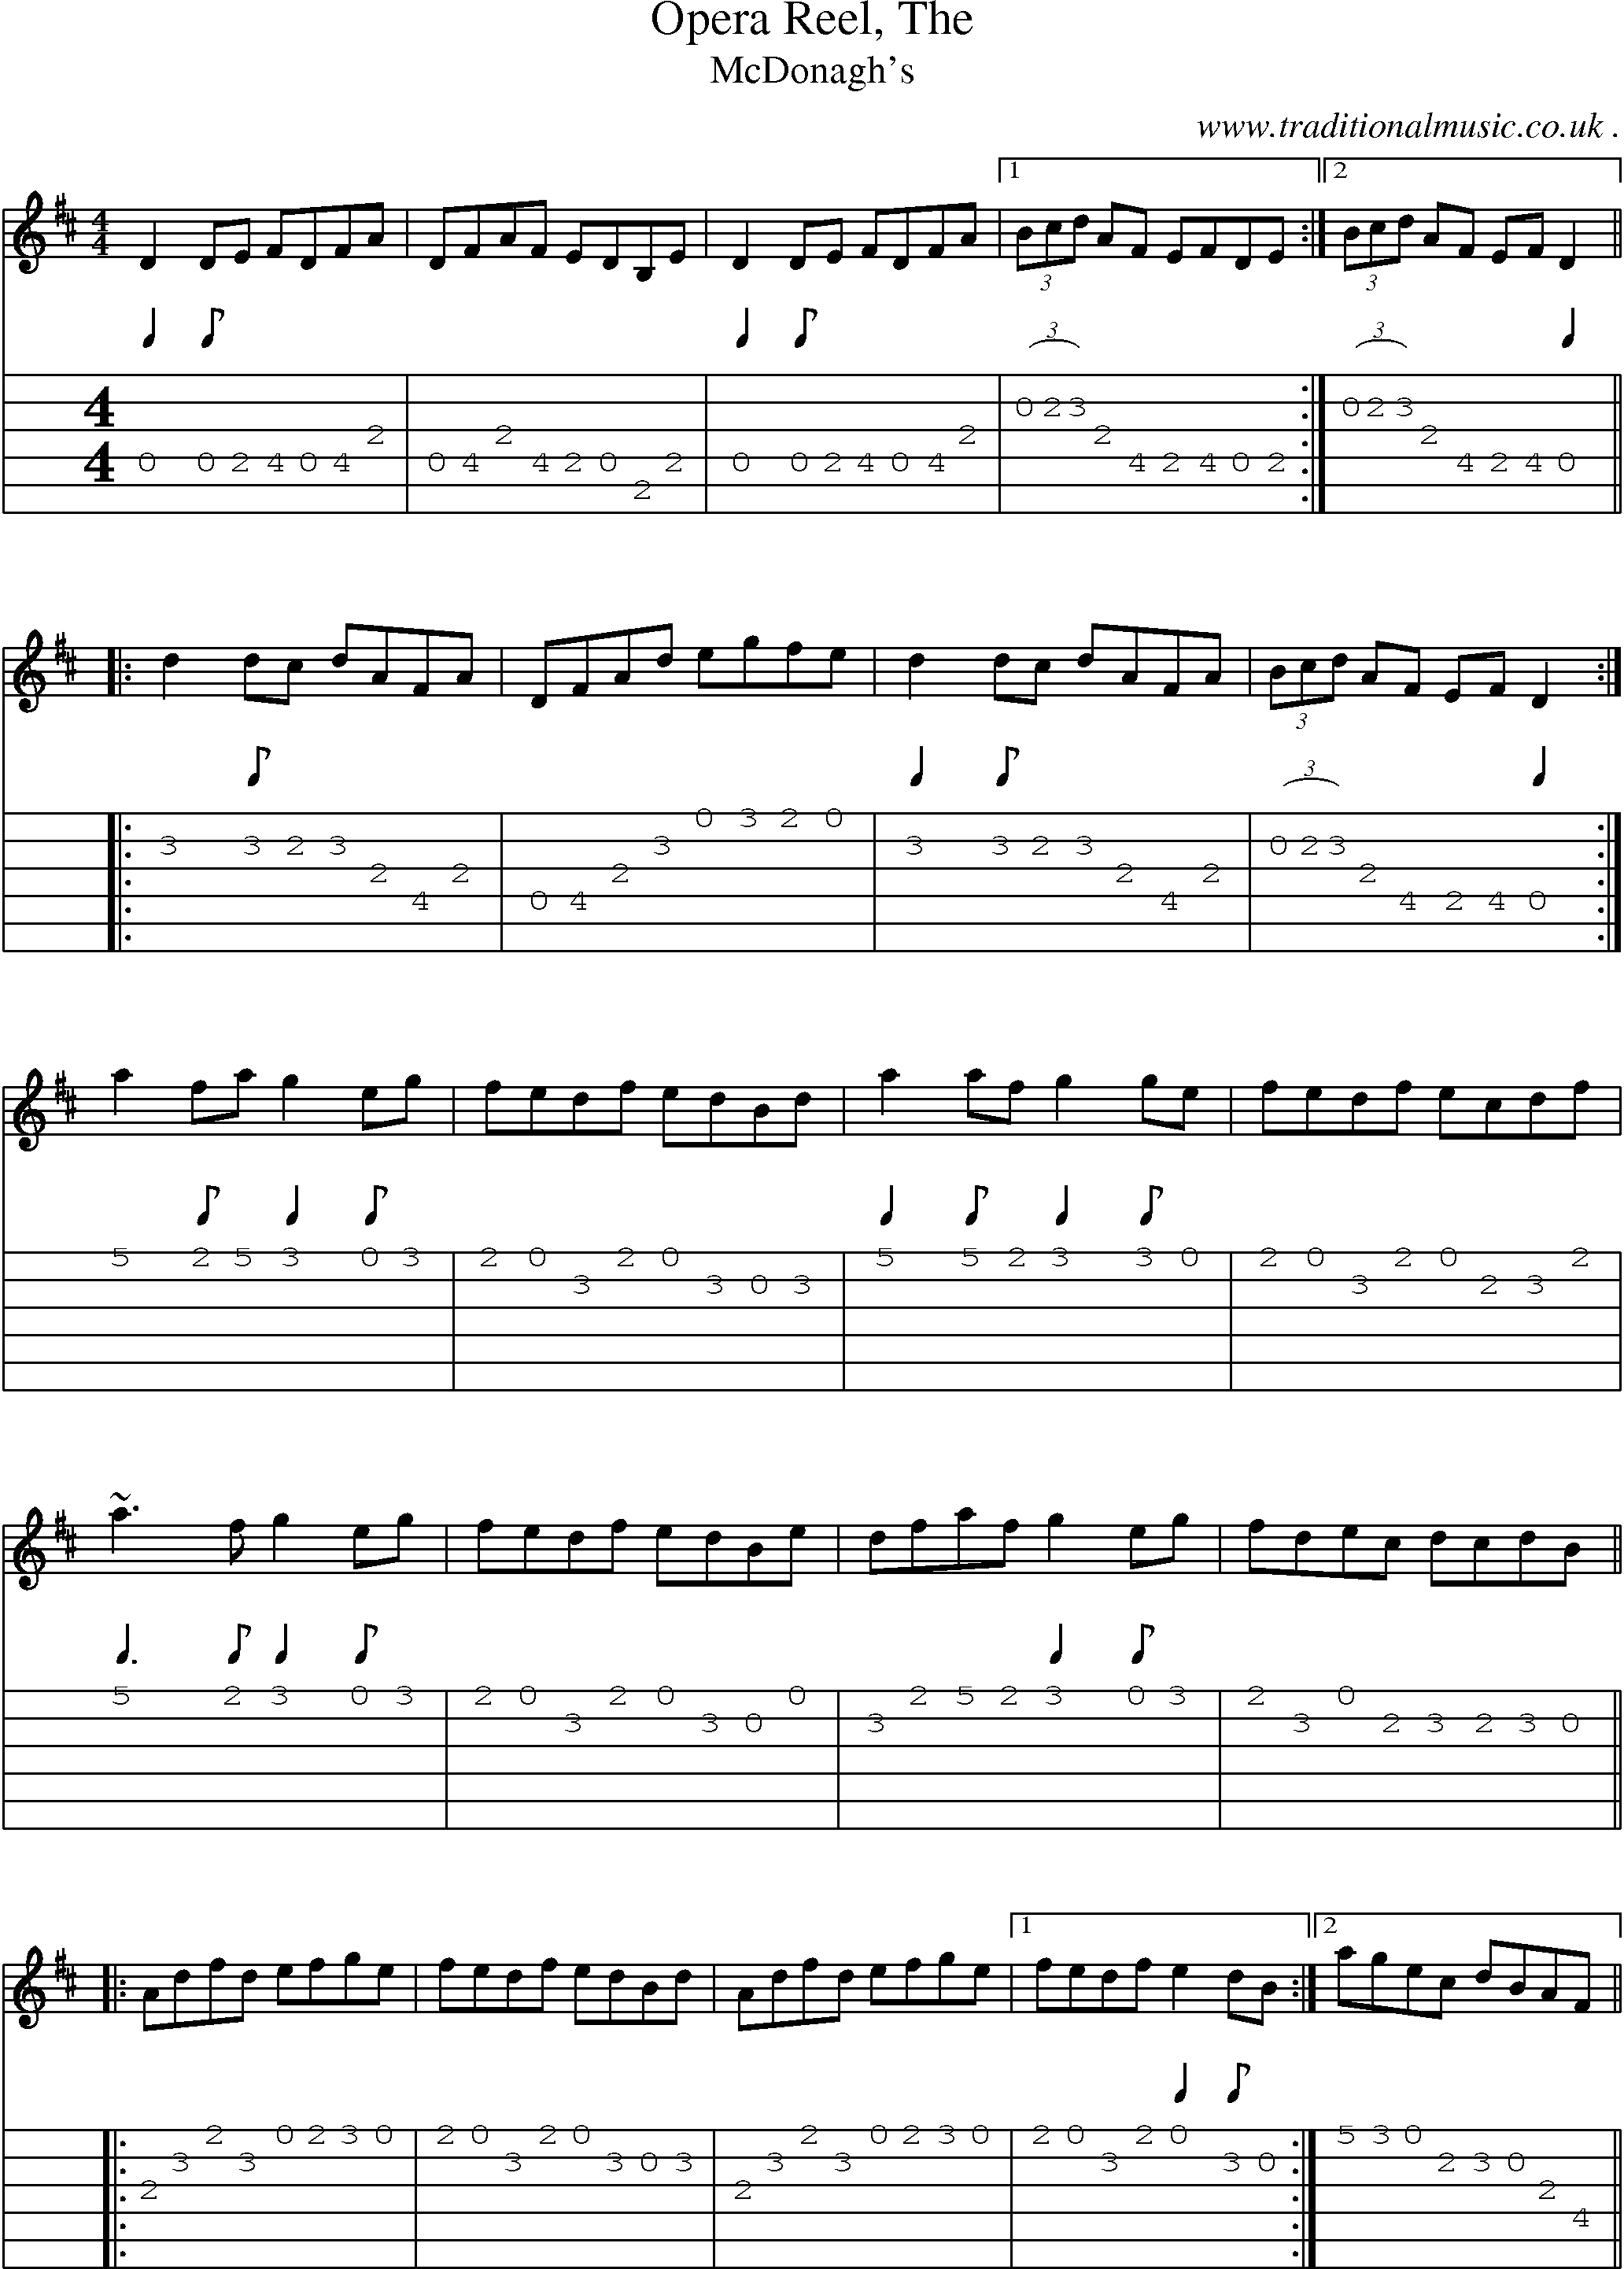 Music Score and Guitar Tabs for Opera Reel The